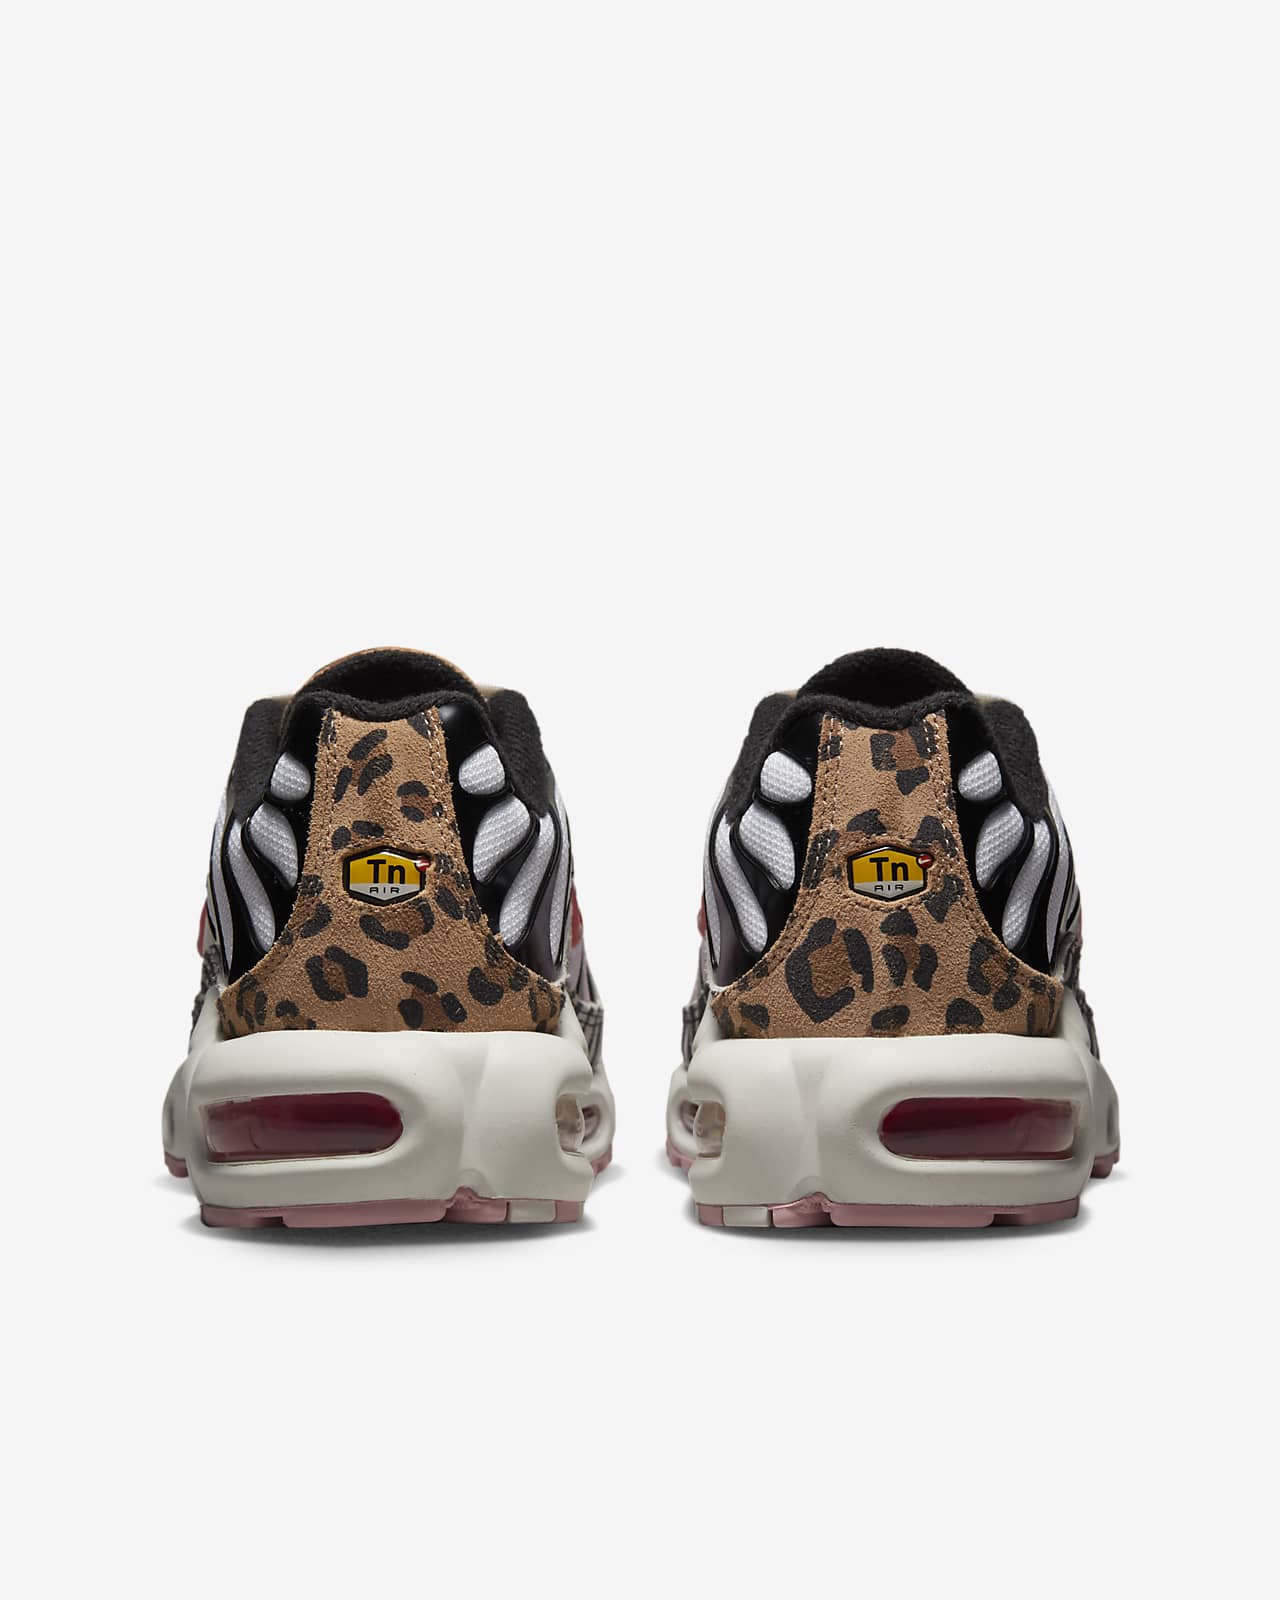 Clasp toothache two weeks Nike Air Max Plus Women's Shoes. Nike.com